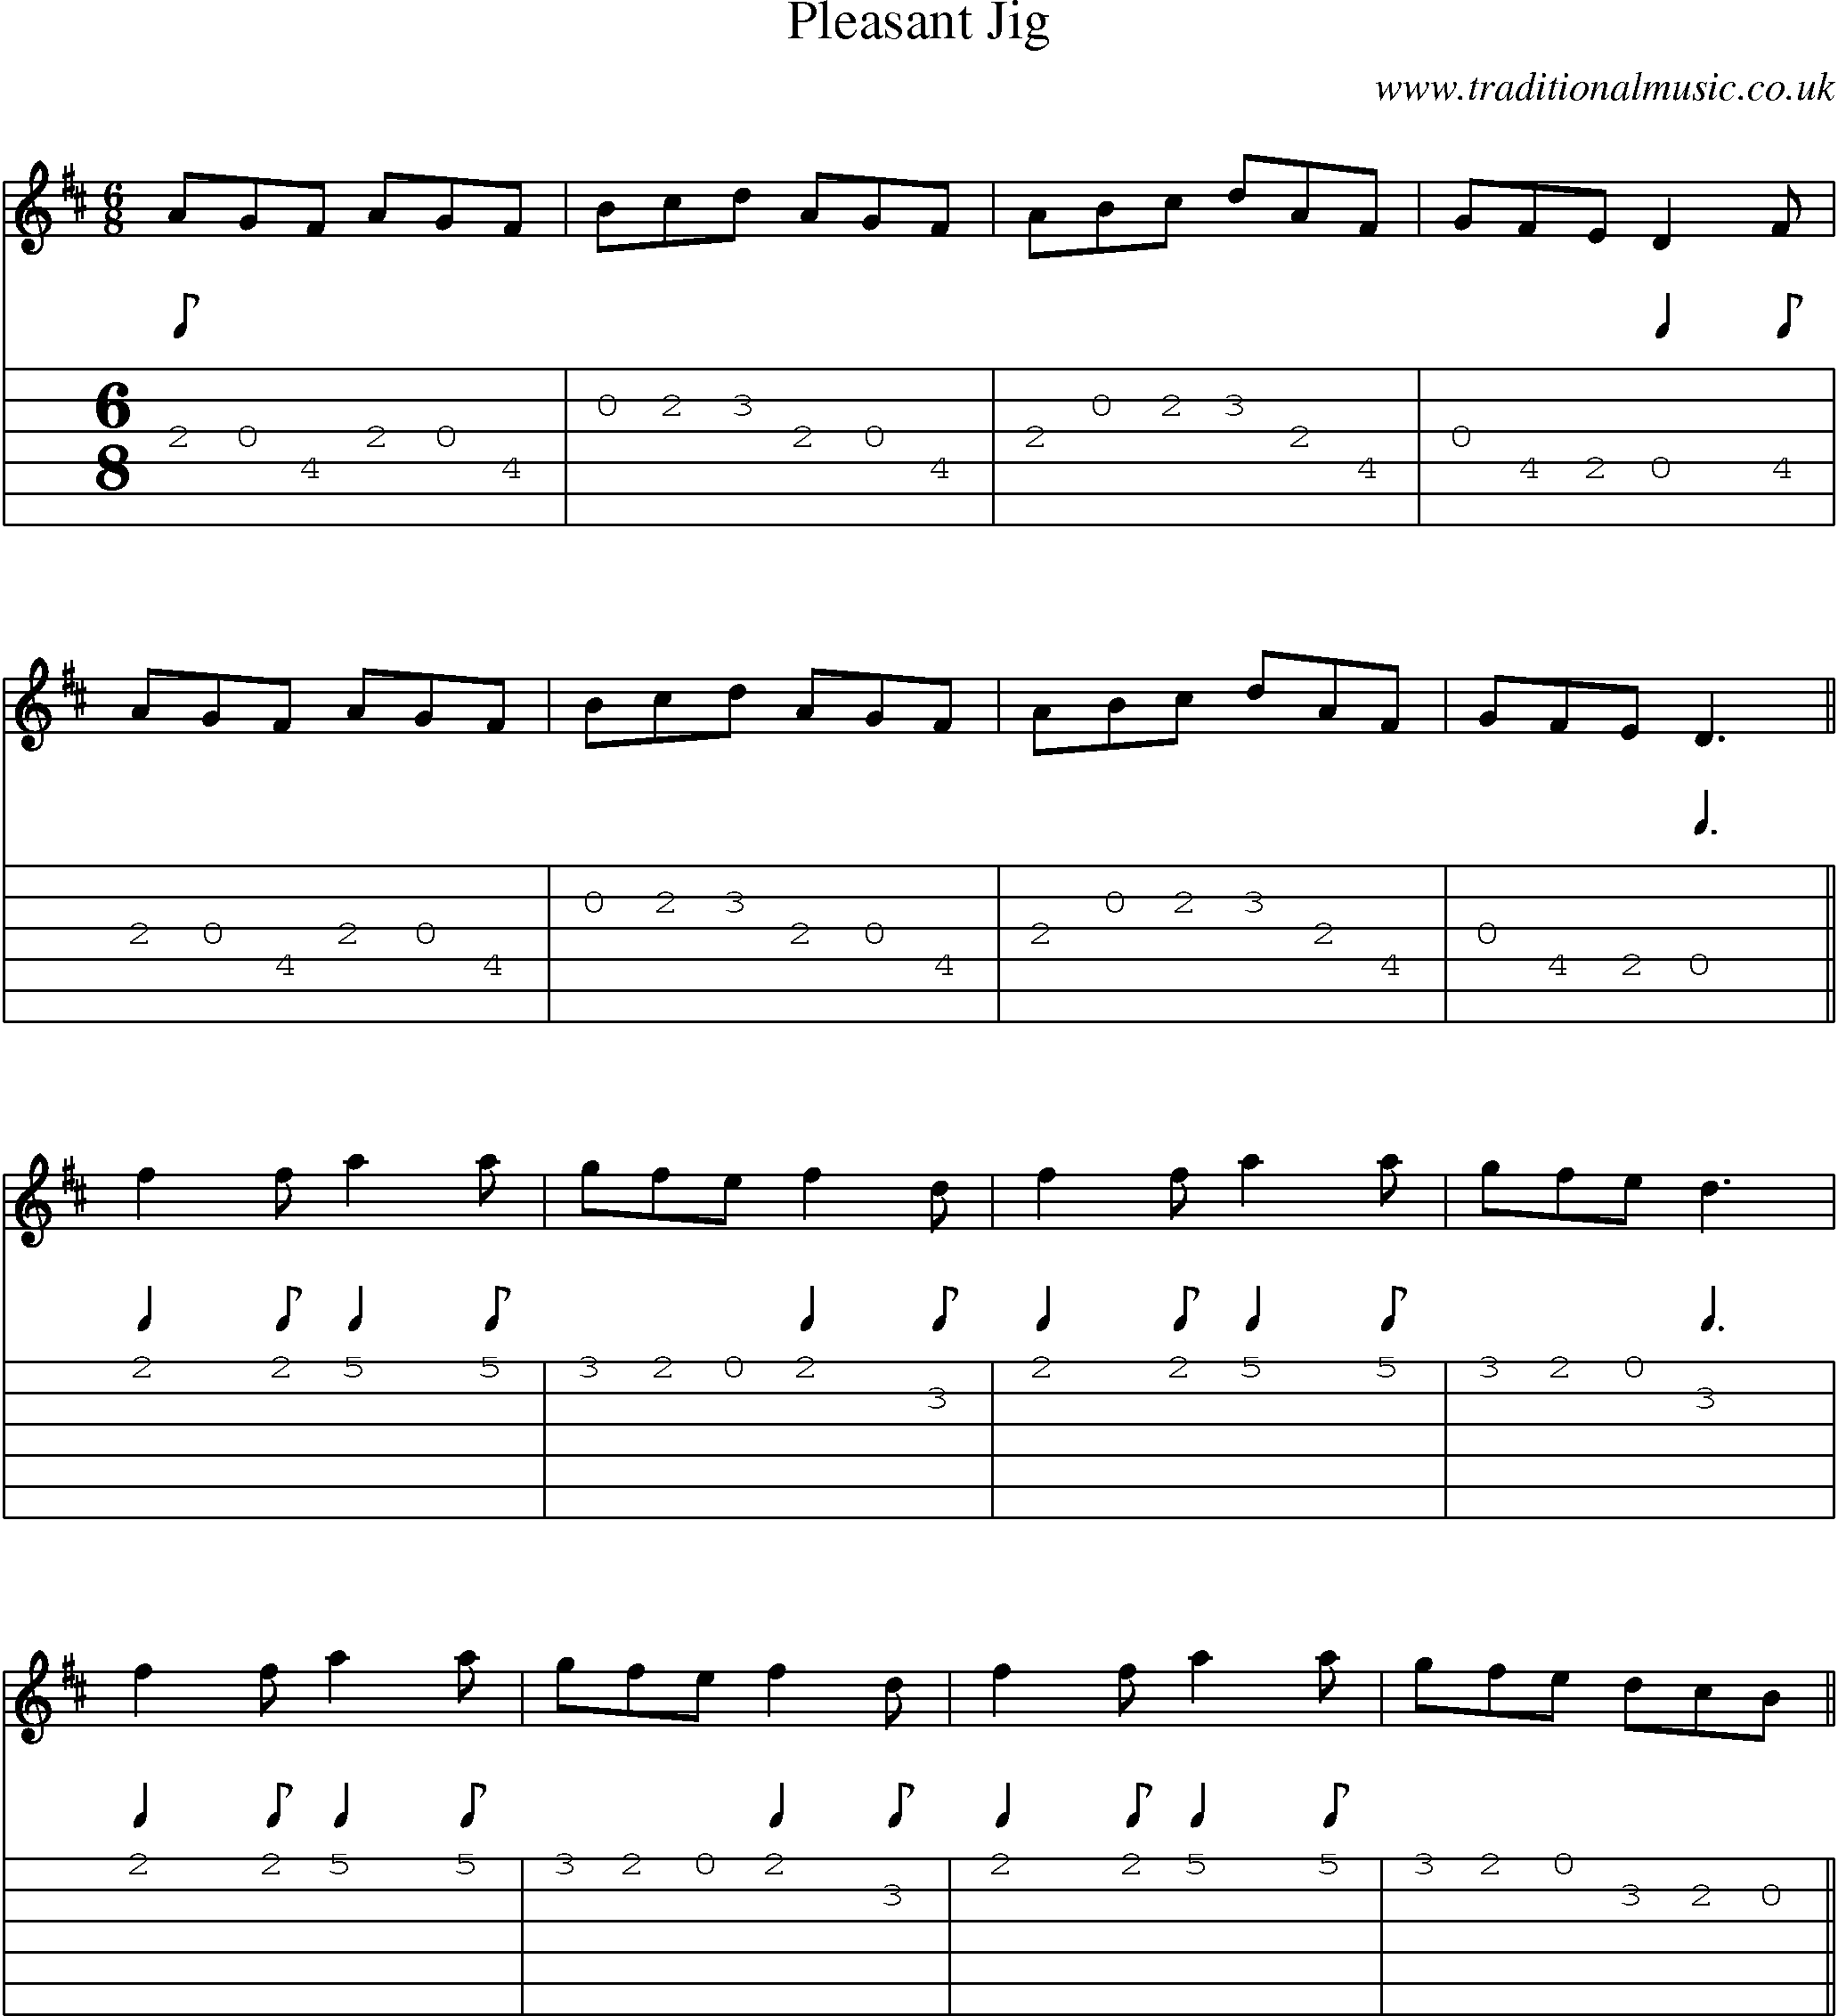 Music Score and Guitar Tabs for Pleasant Jig